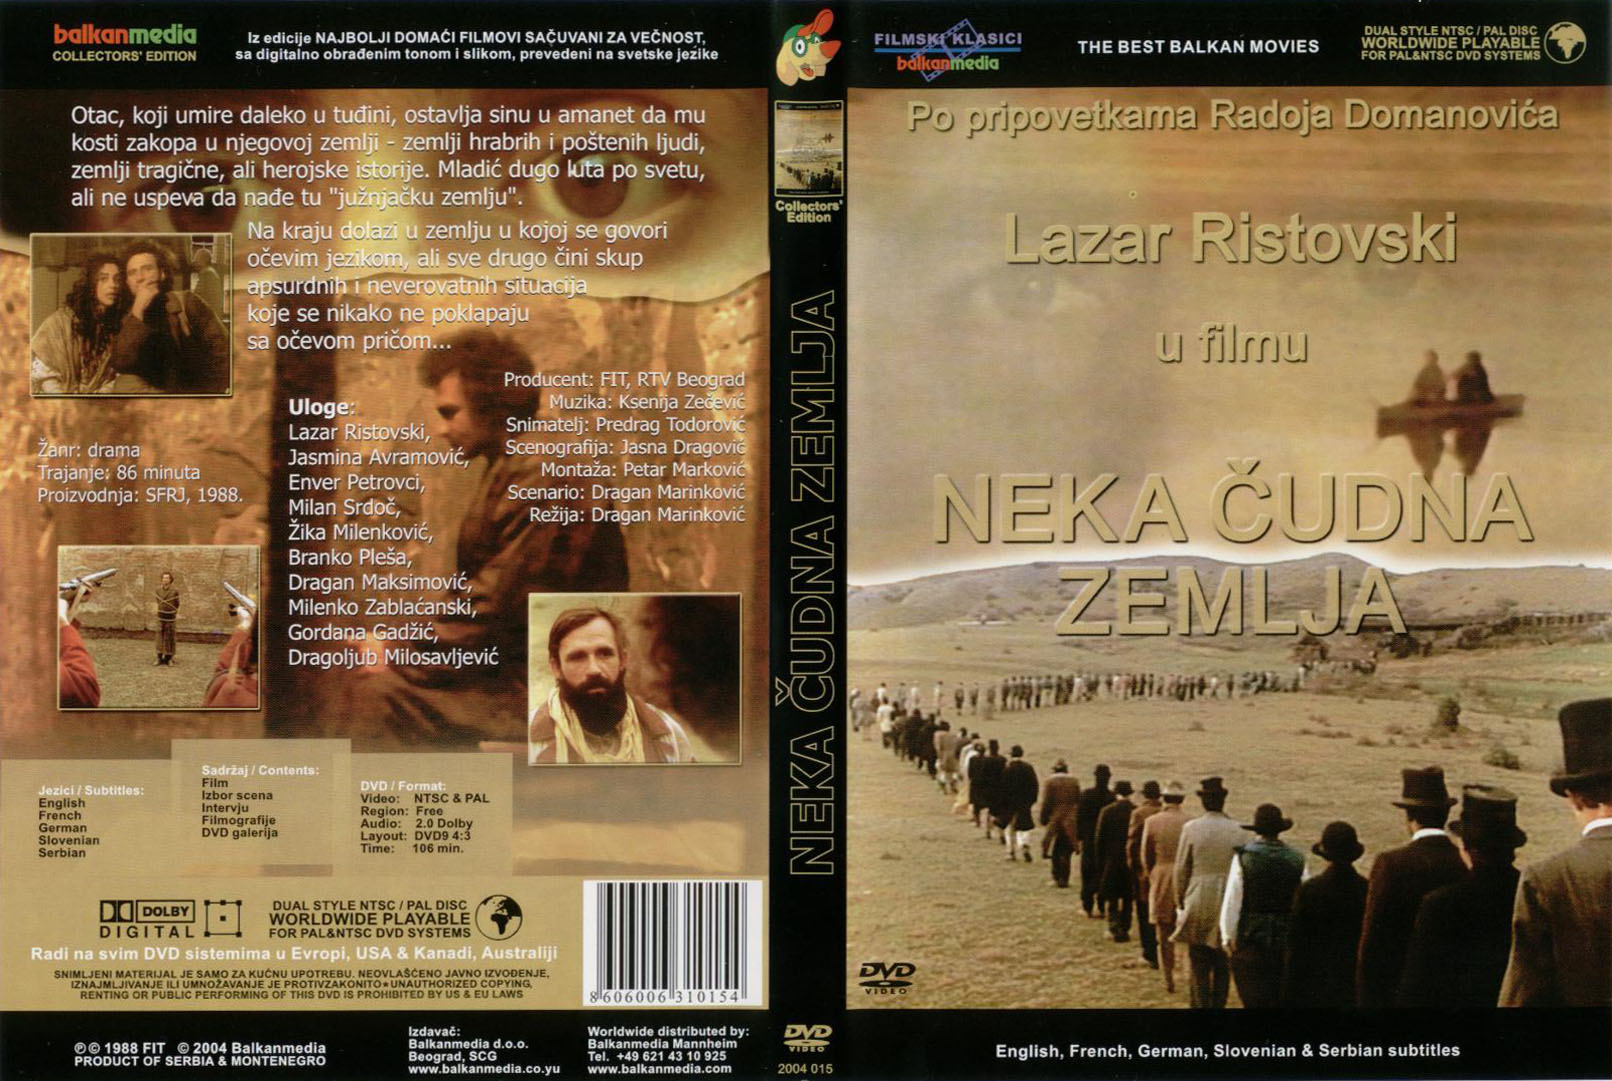 Click to view full size image -  DVD Cover - N - neka_cudna_zemlja_dvd - neka_cudna_zemlja_dvd.jpg